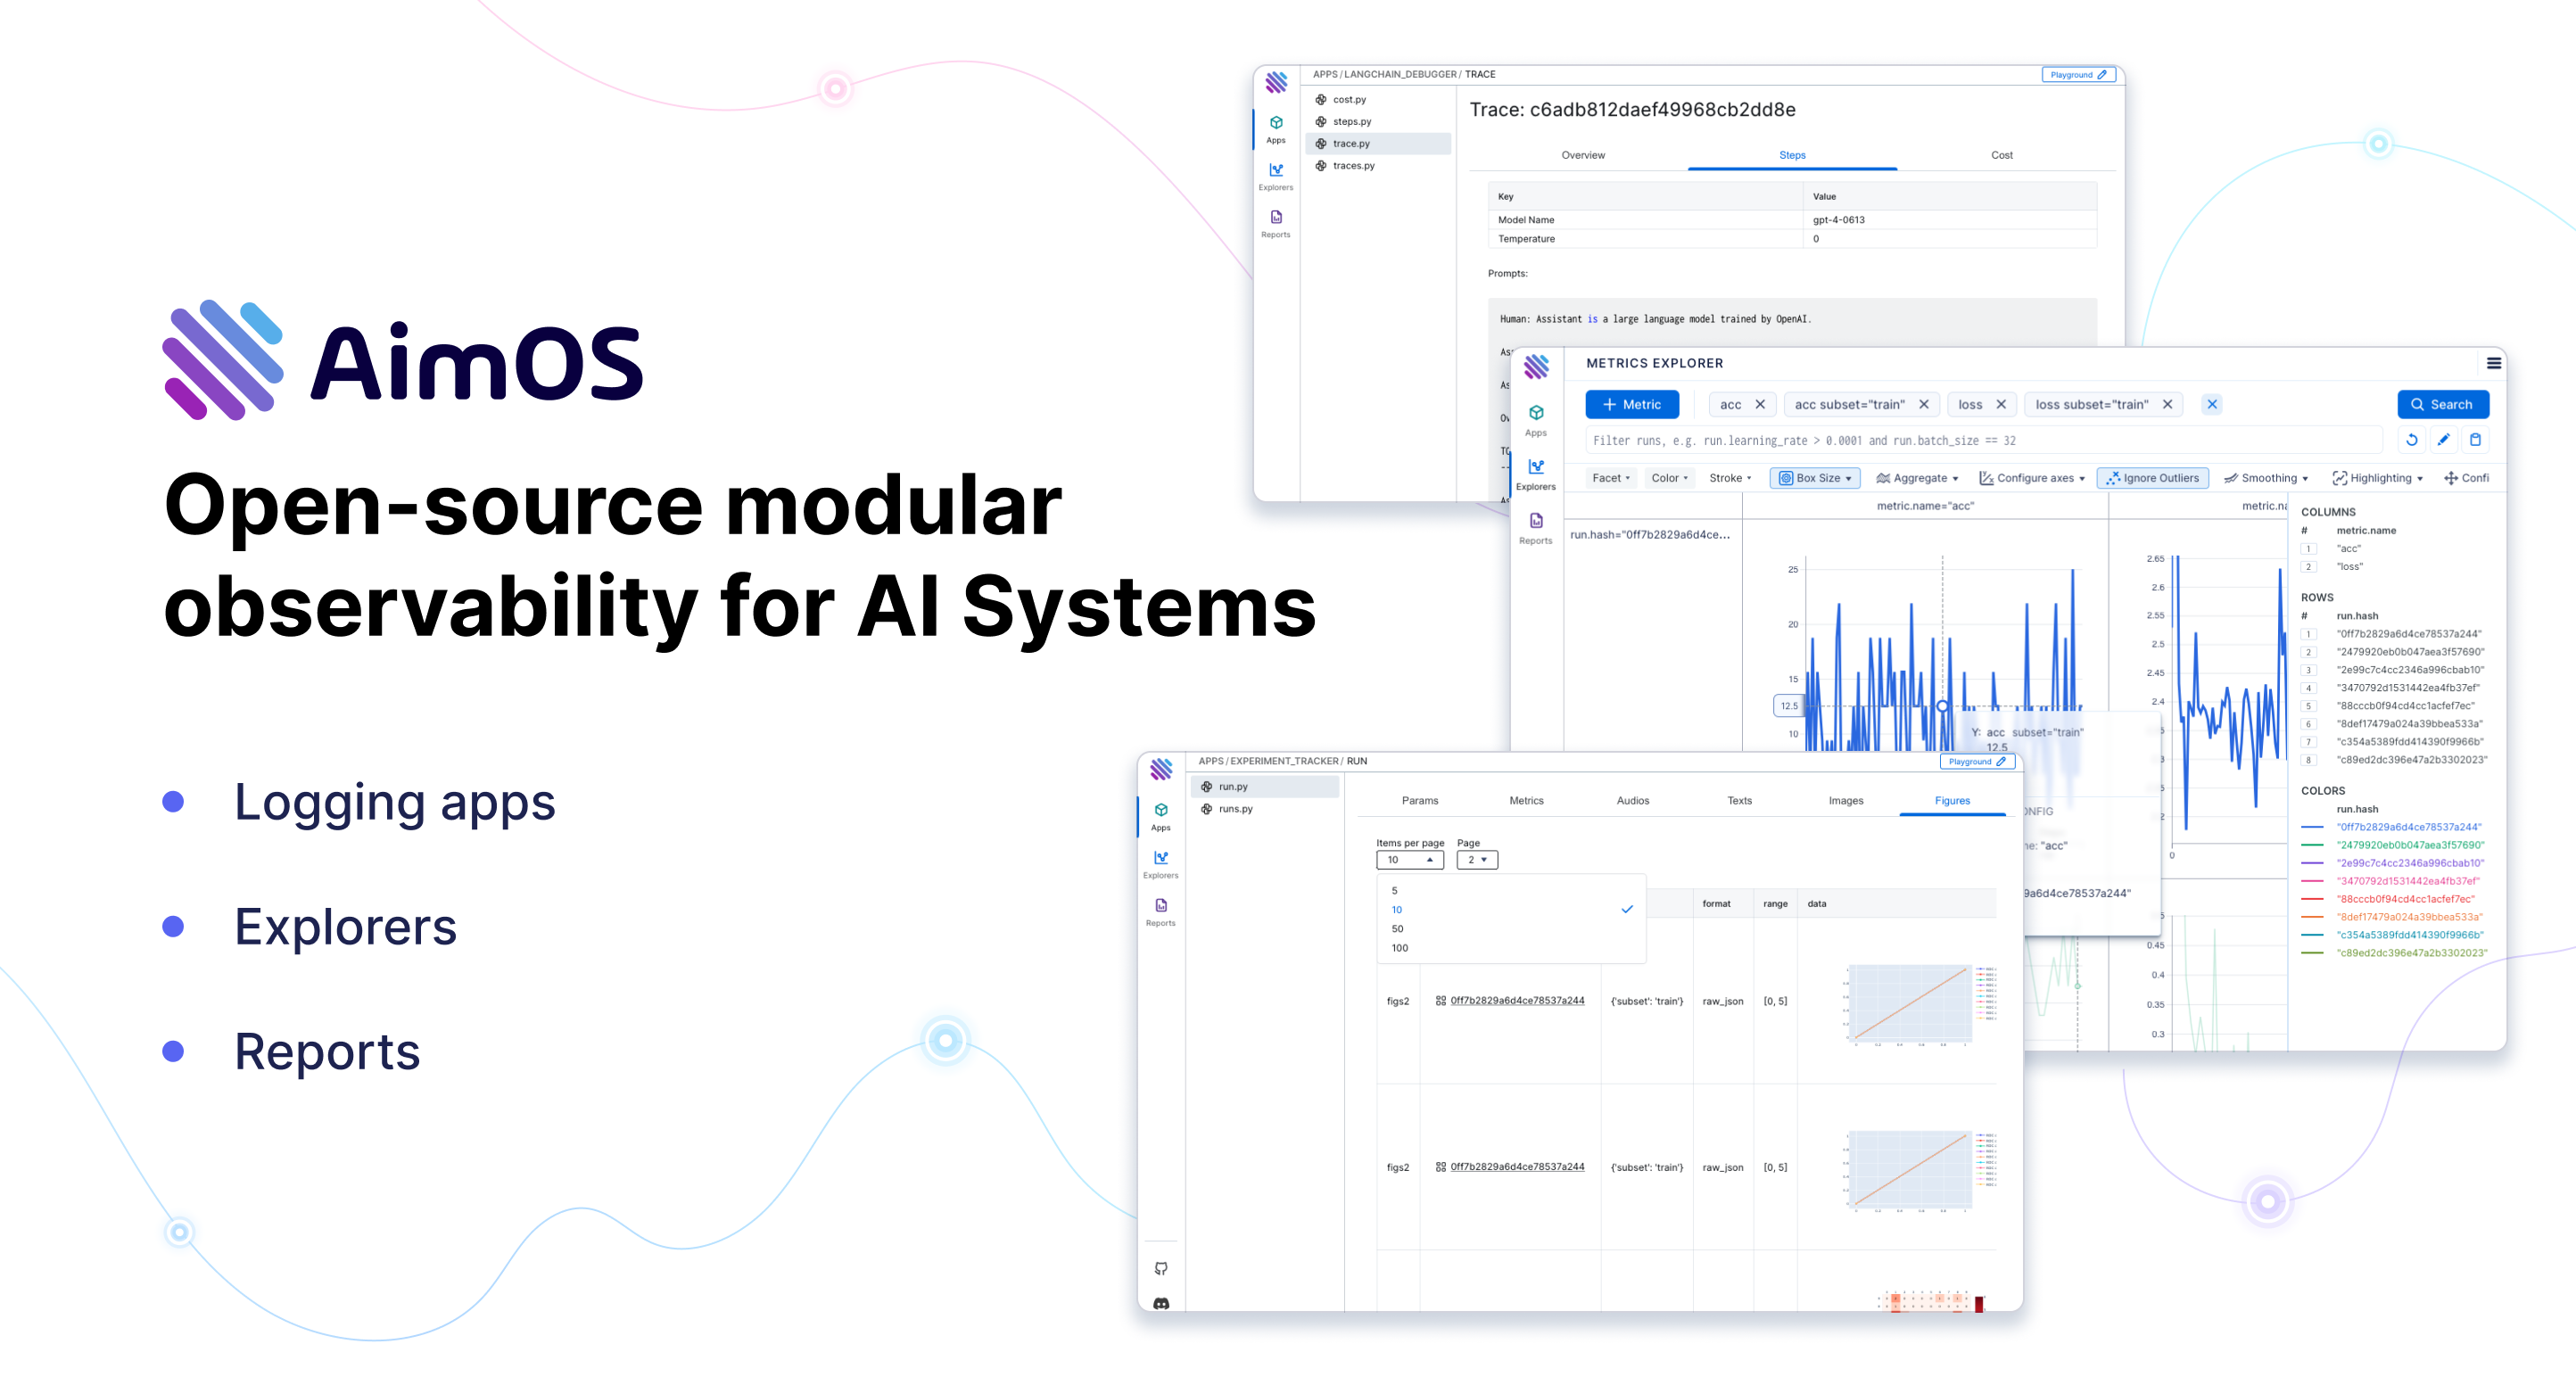 AimOS: Open-source modular observability for AI Systems